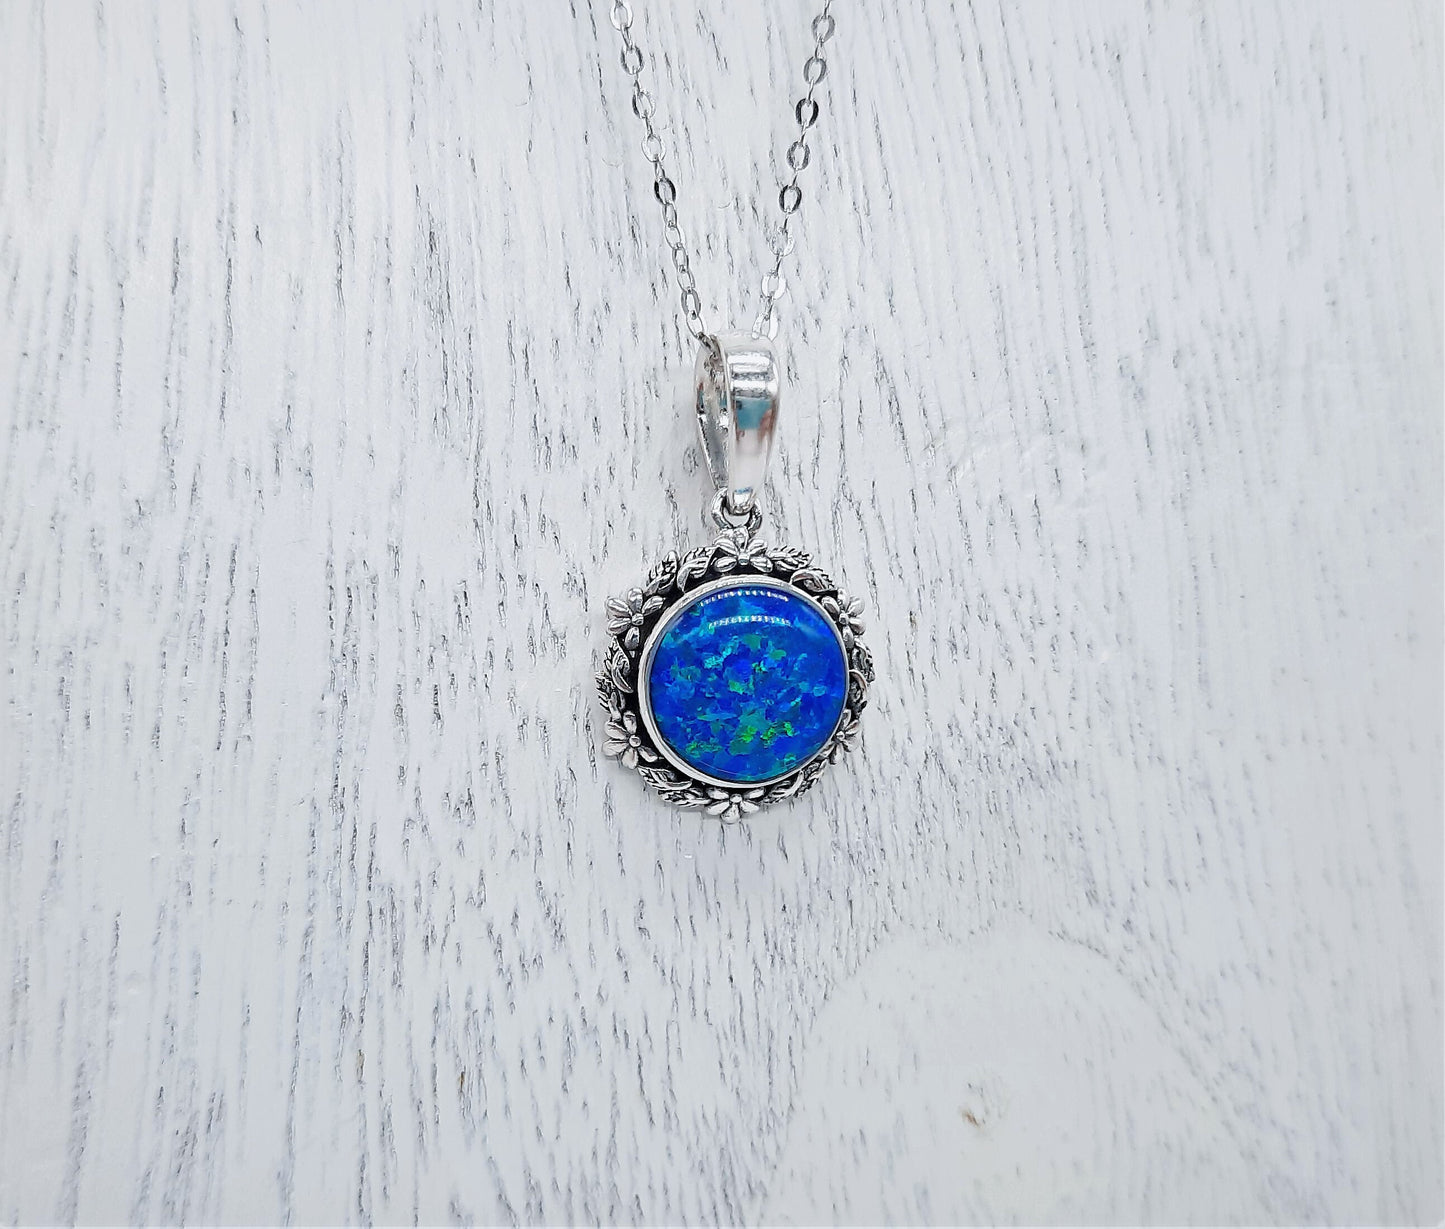 Handcrafted Iridescent Blue Opal Pendant Necklace - Flower and Leaf Design - Made with 925 Sterling Silver - Domed with Holographic Resin